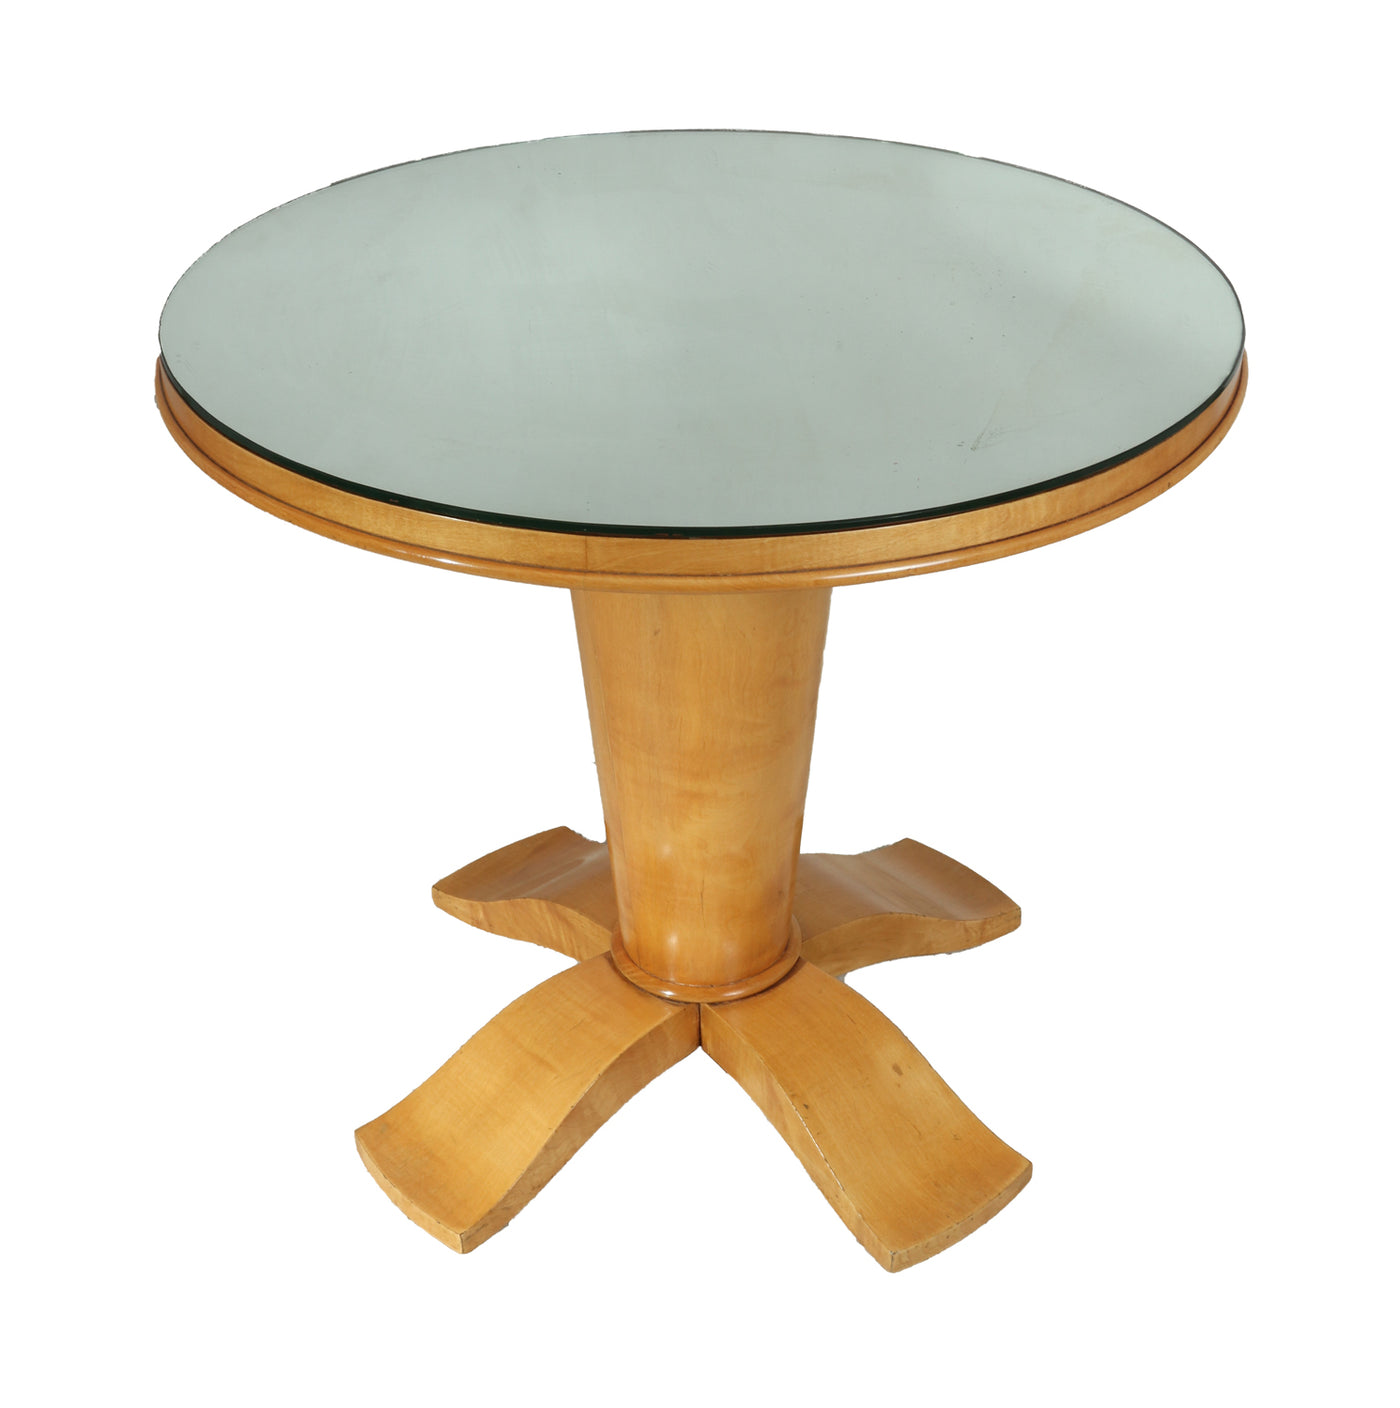 Art Deco Table with Mirrored top c1940